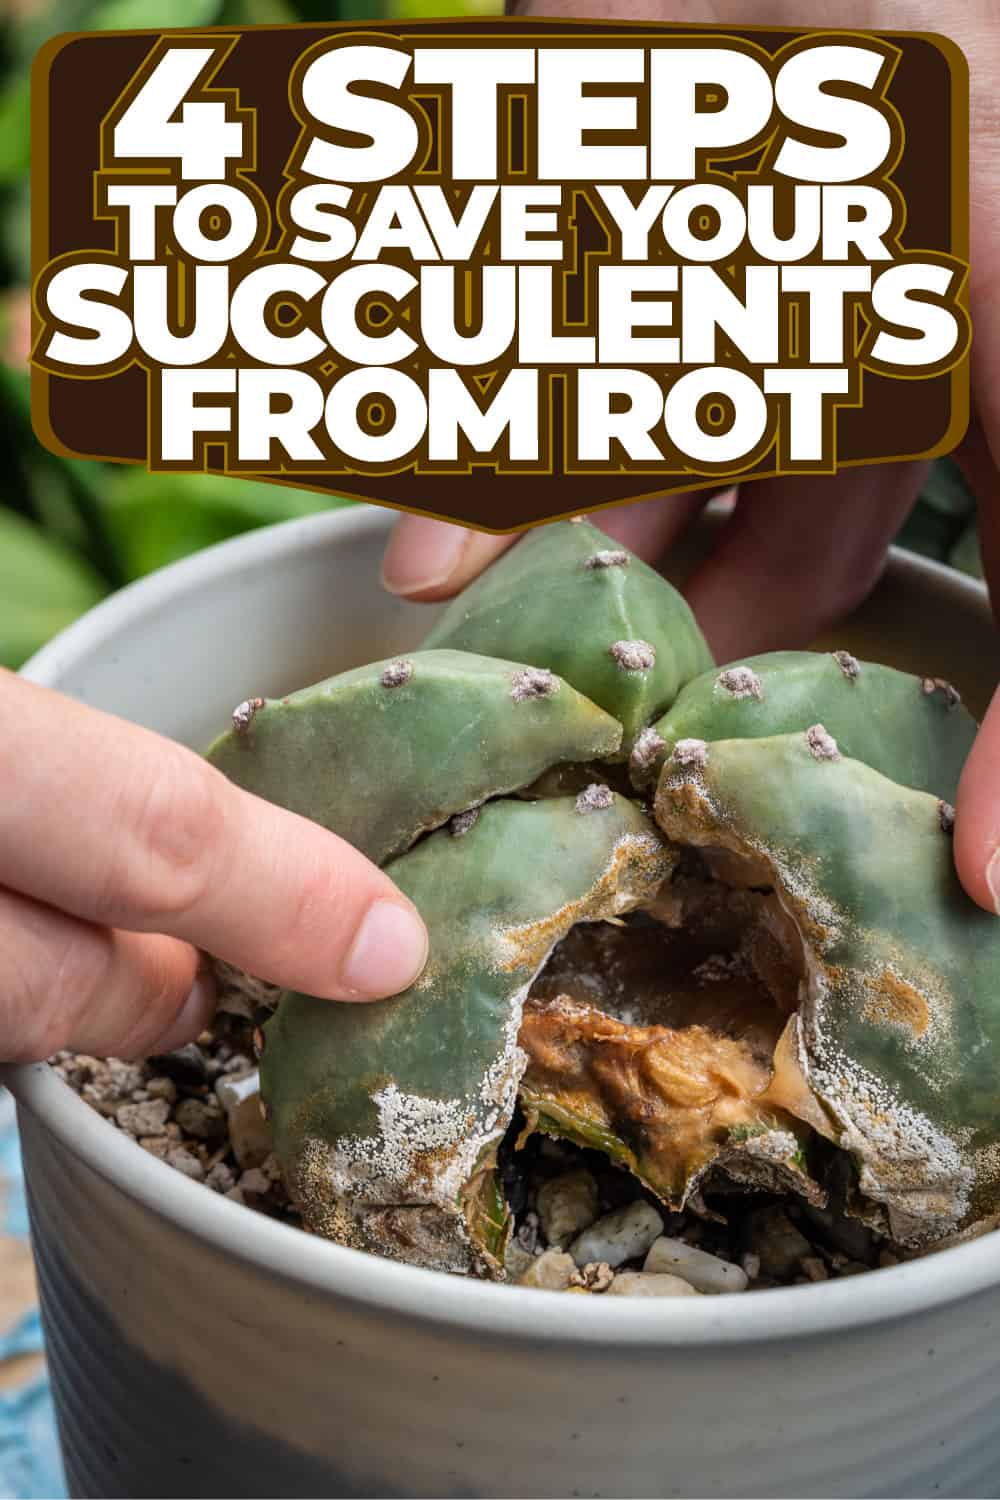 4 Steps to Save Your Succulents from Rot